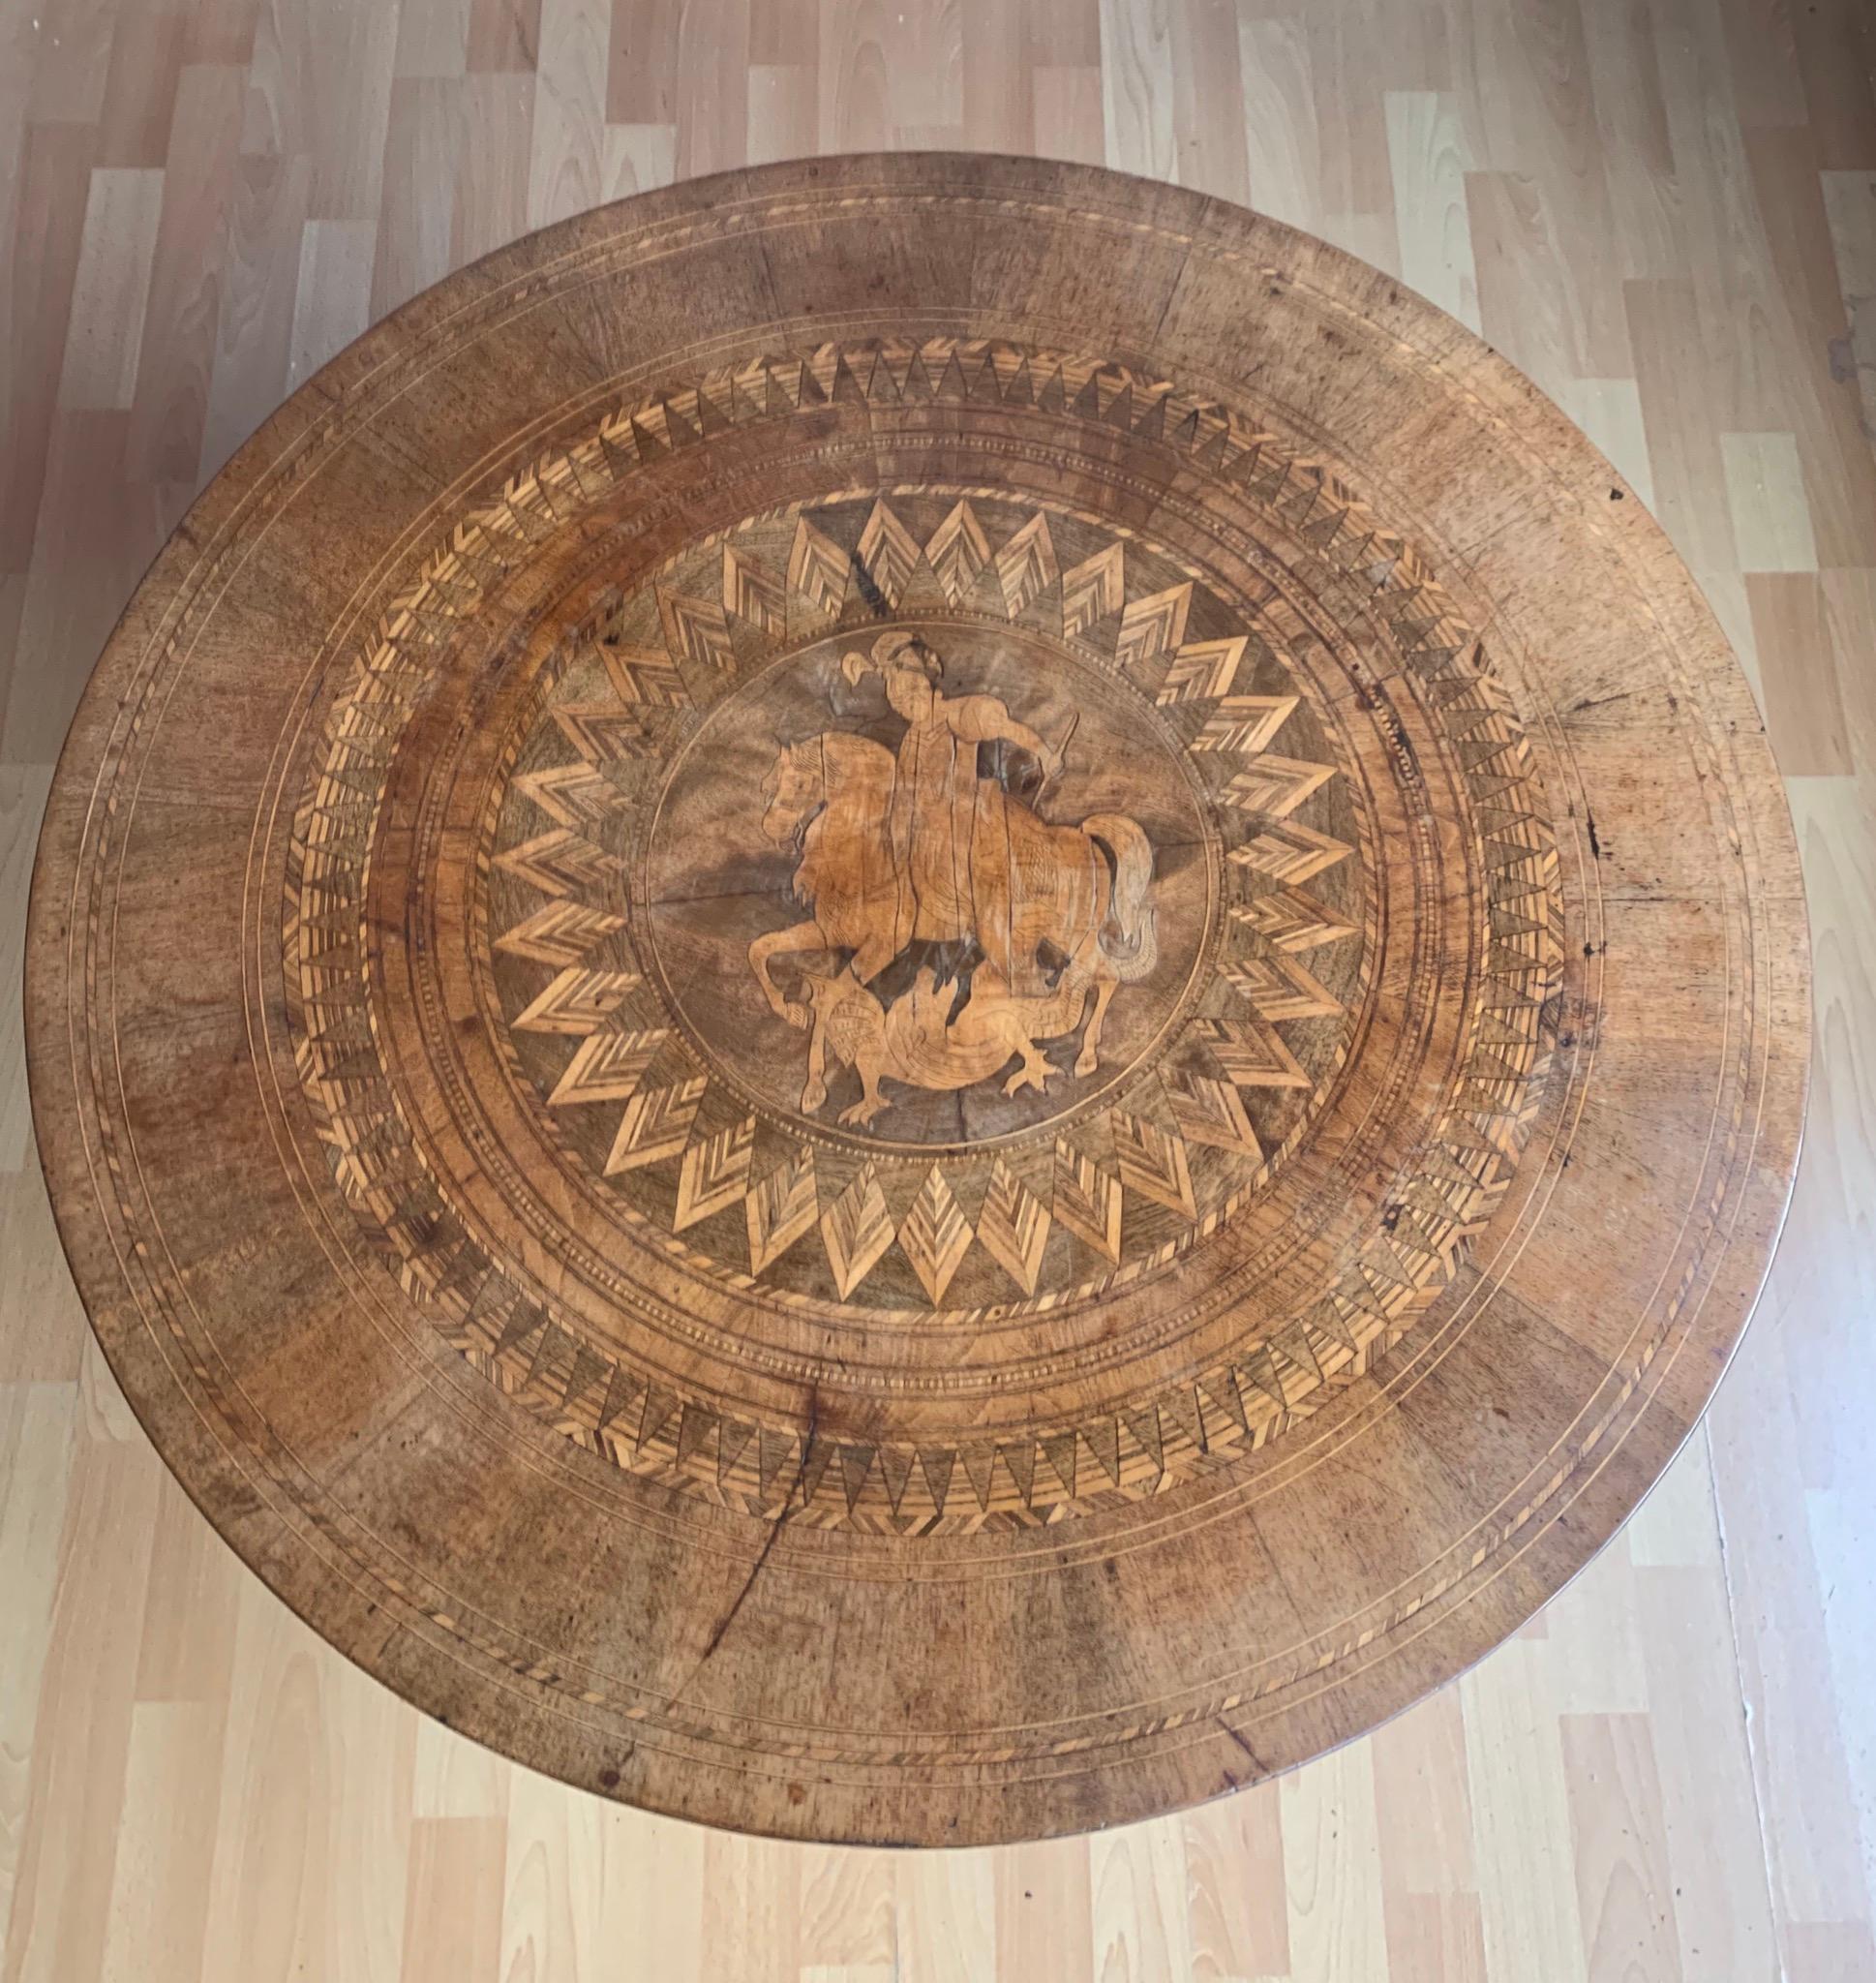 Antique and quality crafted, wooden coffee table.

If you are looking for a beautifully made and highly decorative coffee table then this English specimen could be just the thing for you. This unique table from the mid-1800s stands as strong and